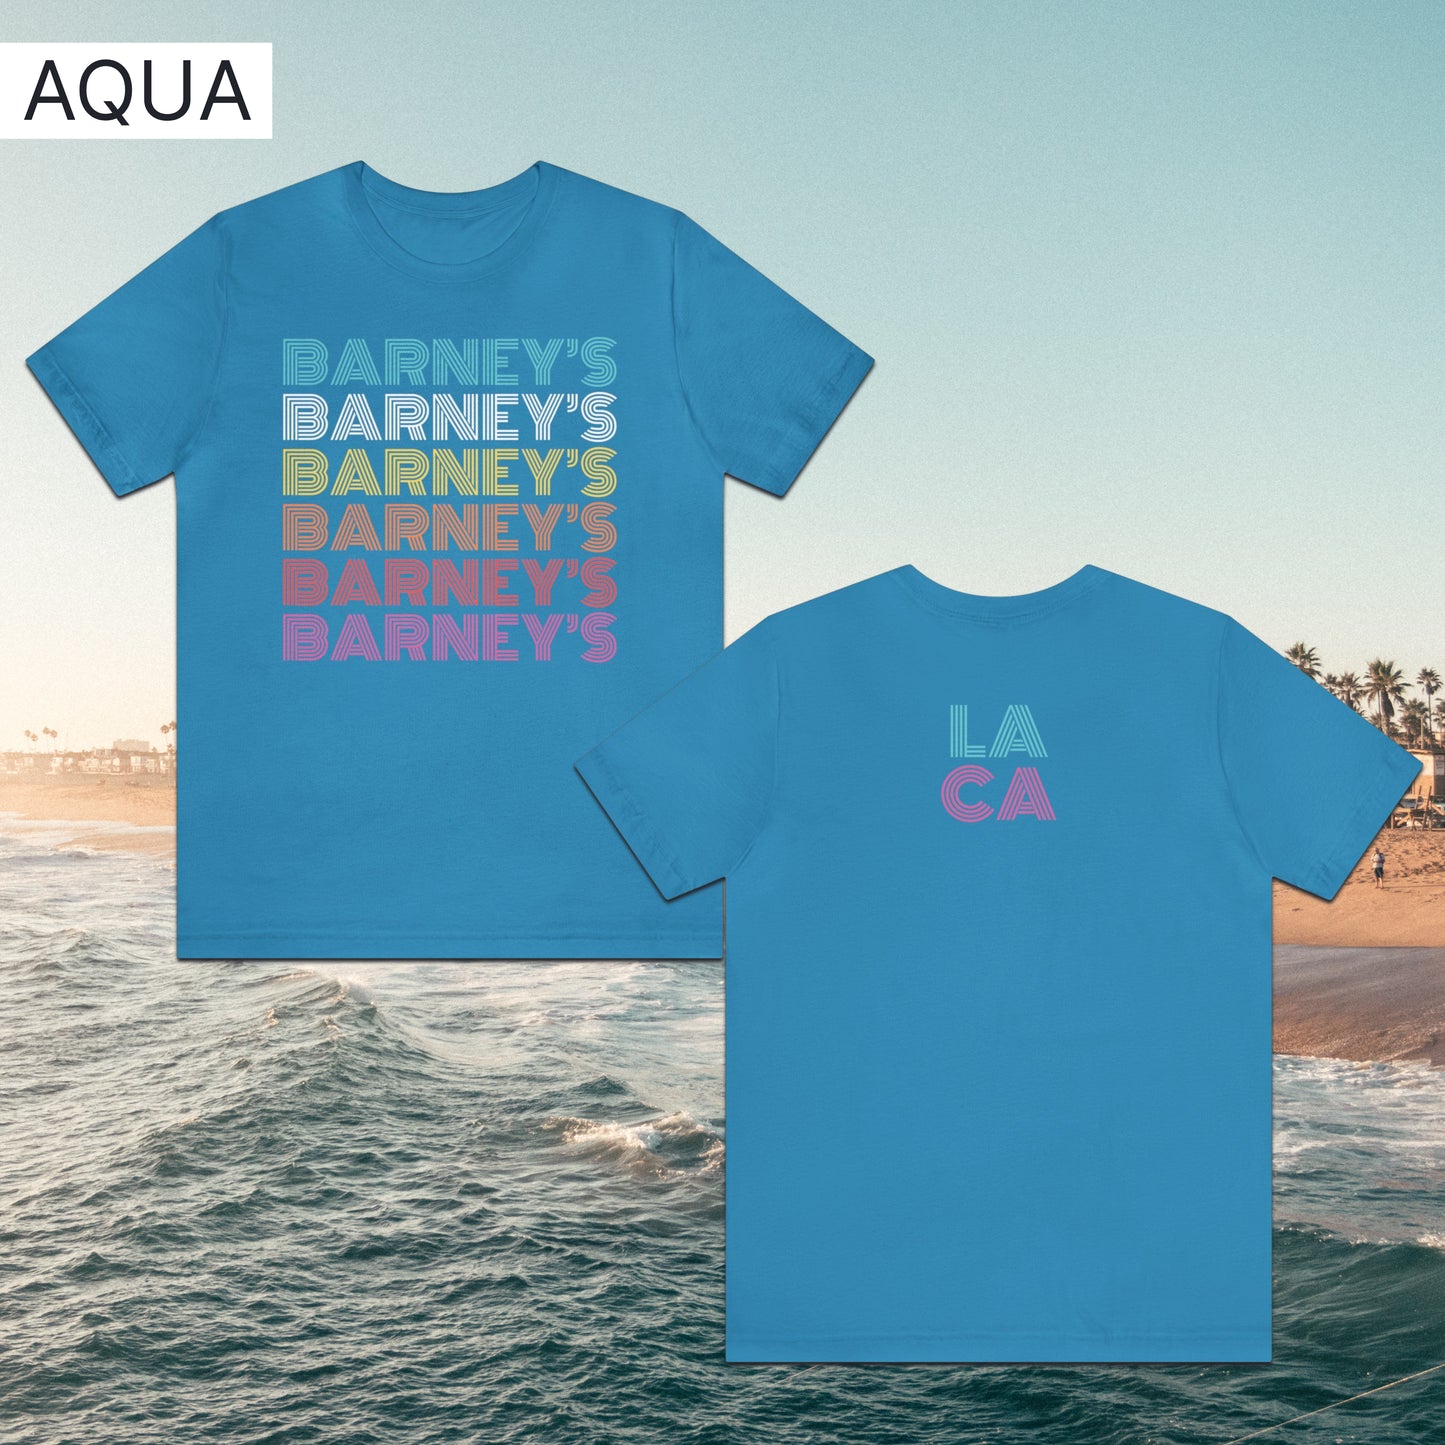 Barney's x6 Retro Hollywood | BARNEY'S BEANERY - Women's Retro Graphic Tee | Aqua Bella+Canvas 3001 T-Shirt - Front And Back Flat Lay View